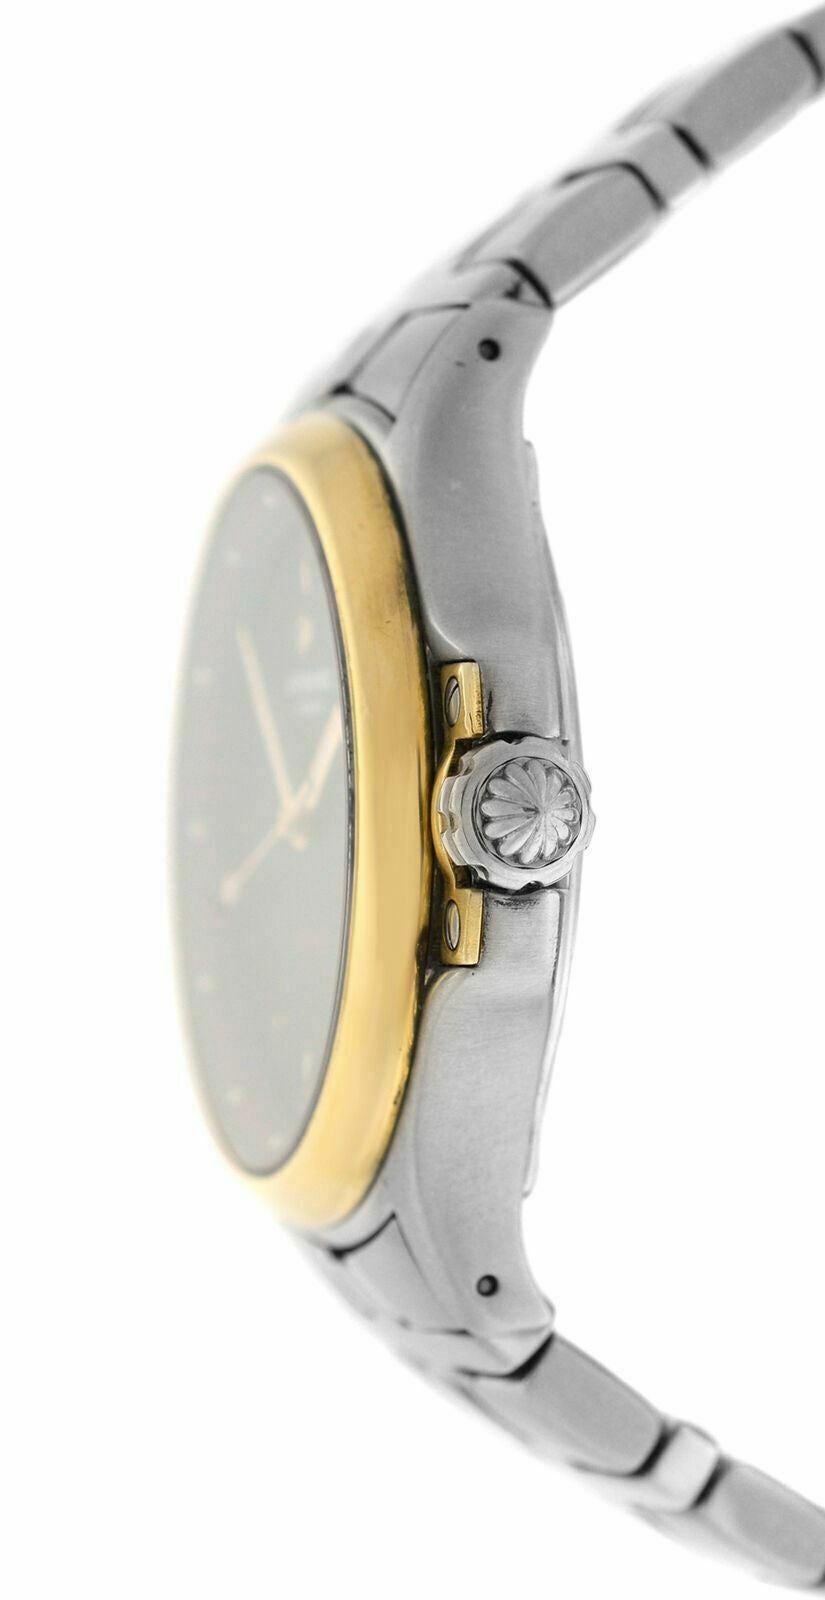 Brand	Raymond Weil
Model	Parsifal 9990
Gender	Ladies
Condition	Pre-Owned
Movement	Quartz
Case Material	Stainless Steel & 18K Yellow Gold Electroplated
Bracelet / Strap Material	Stainless Steel & 18K Yellow Gold Electroplated
Clasp / Buckle